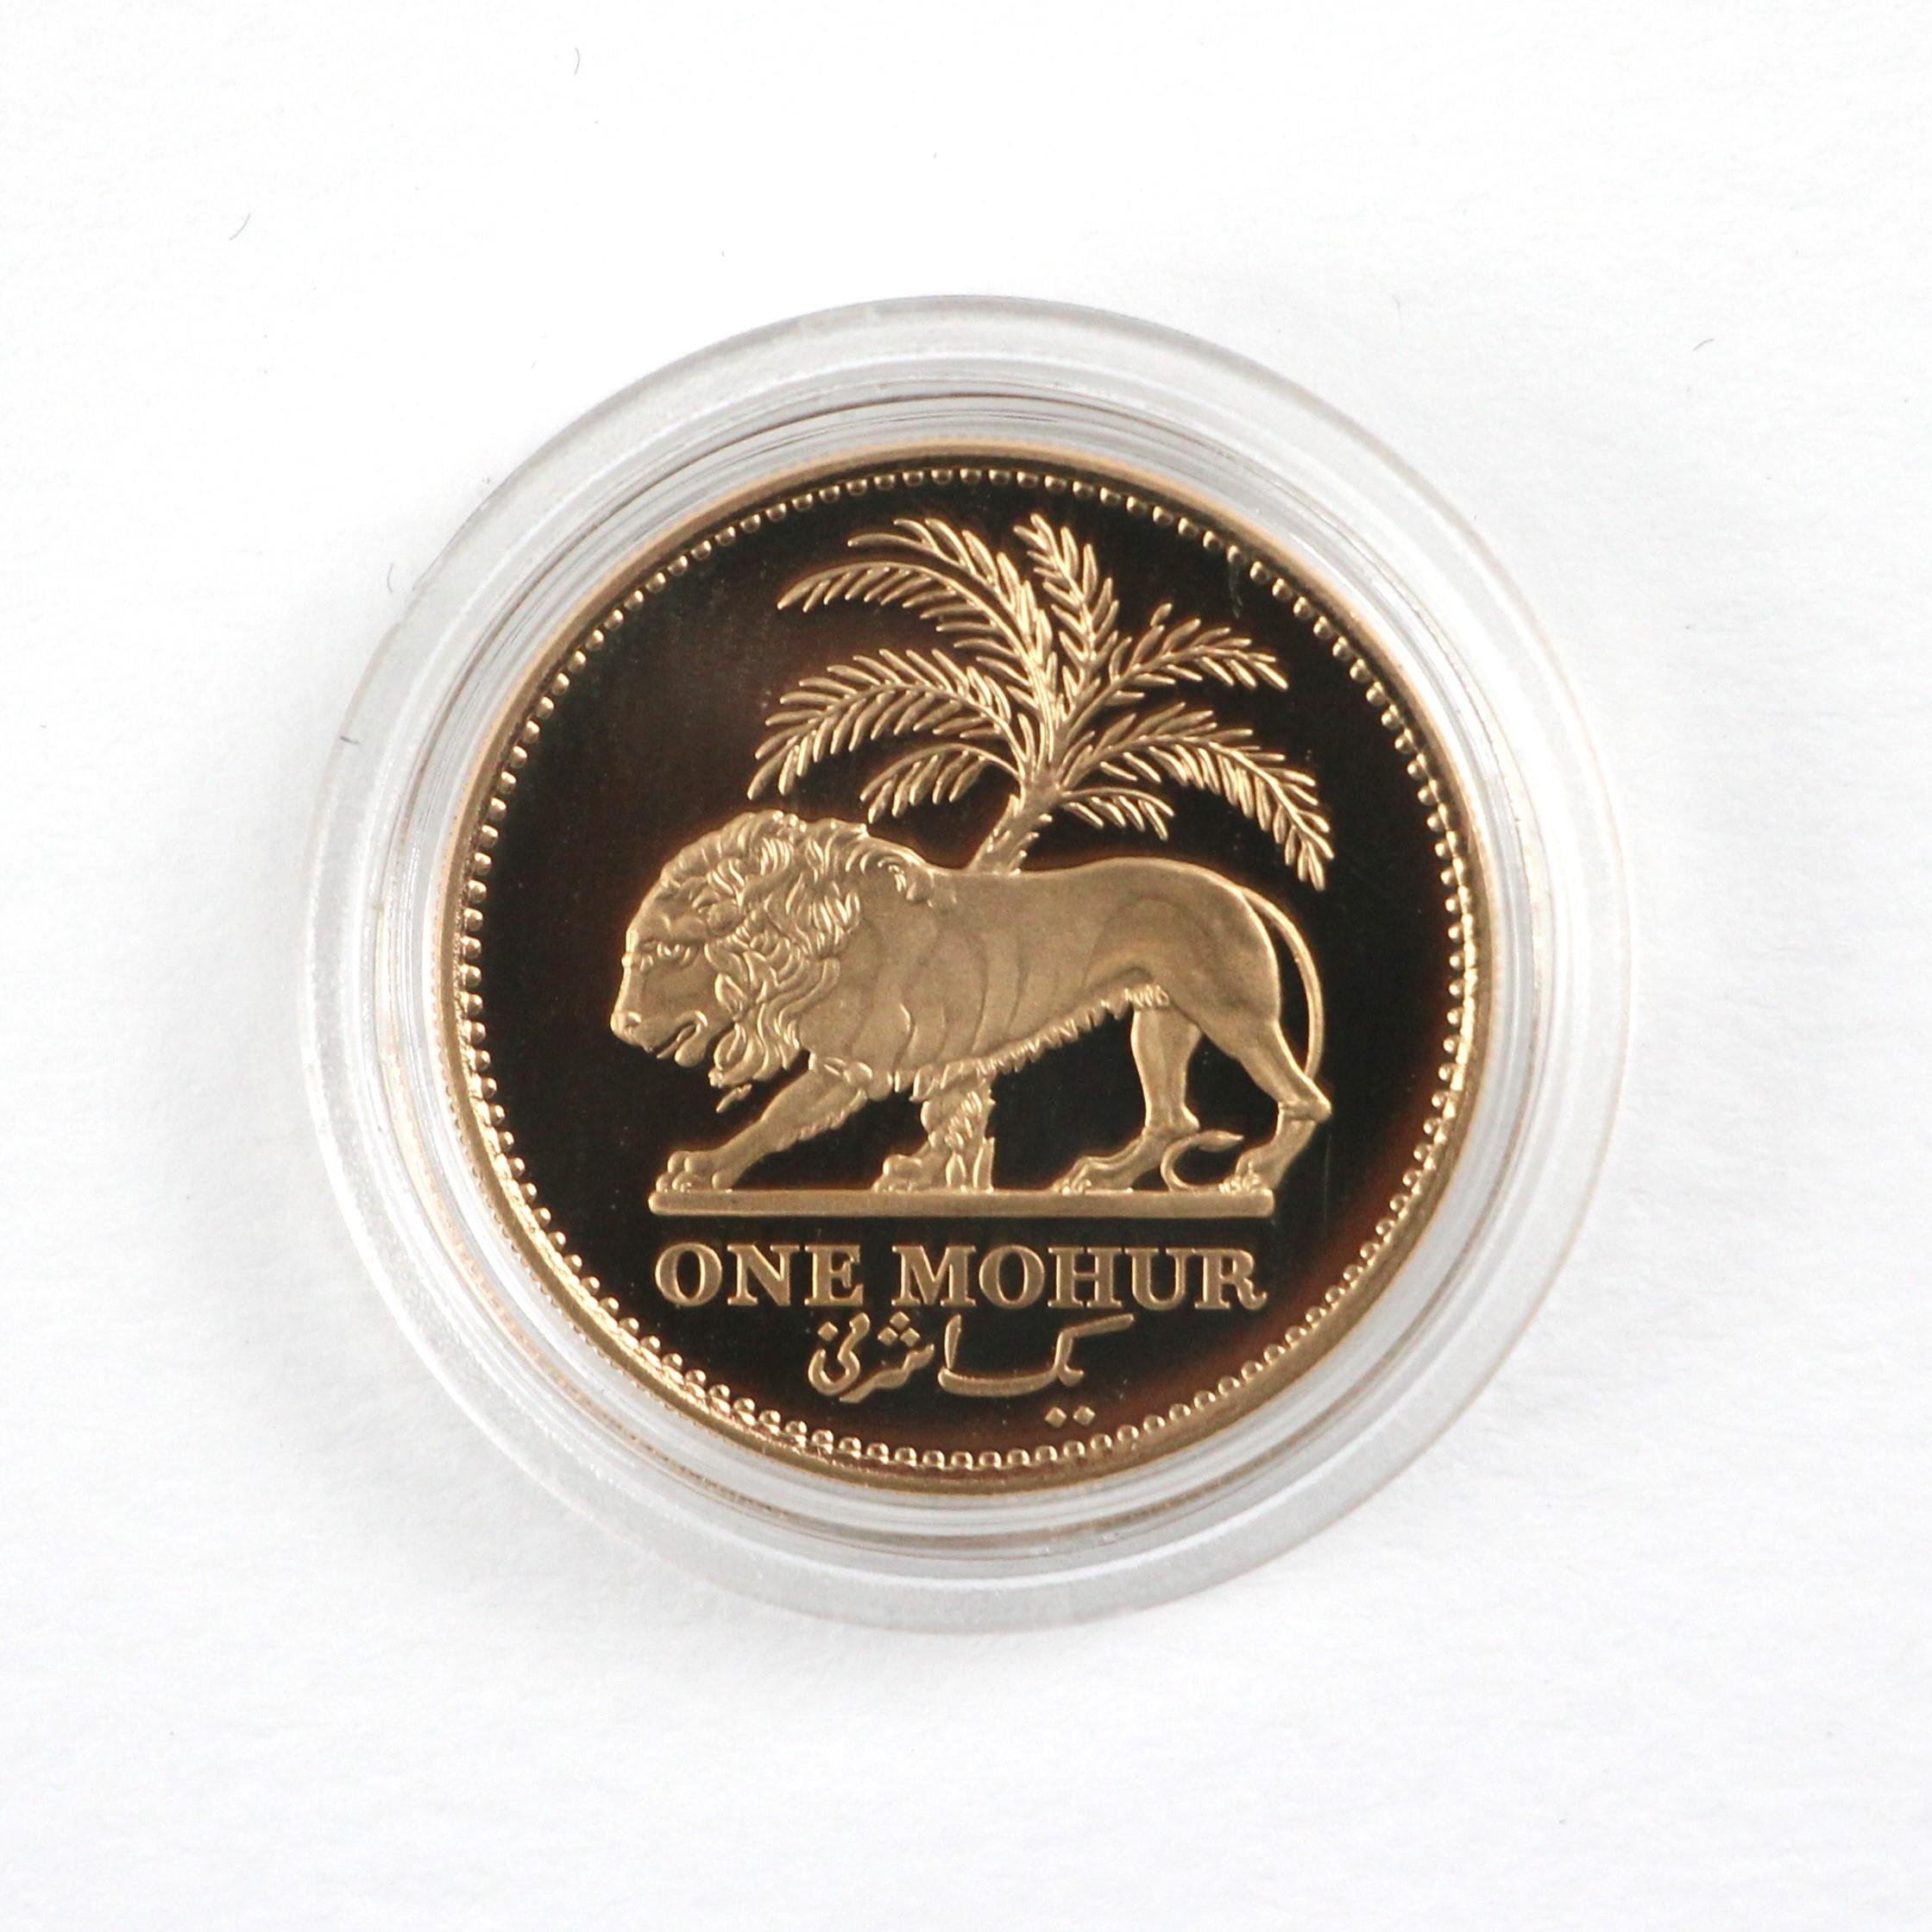 The East India Company, Elizabeth II (1952-2022), One Mohur, 2010, Proof, 257/1000, The Lion and